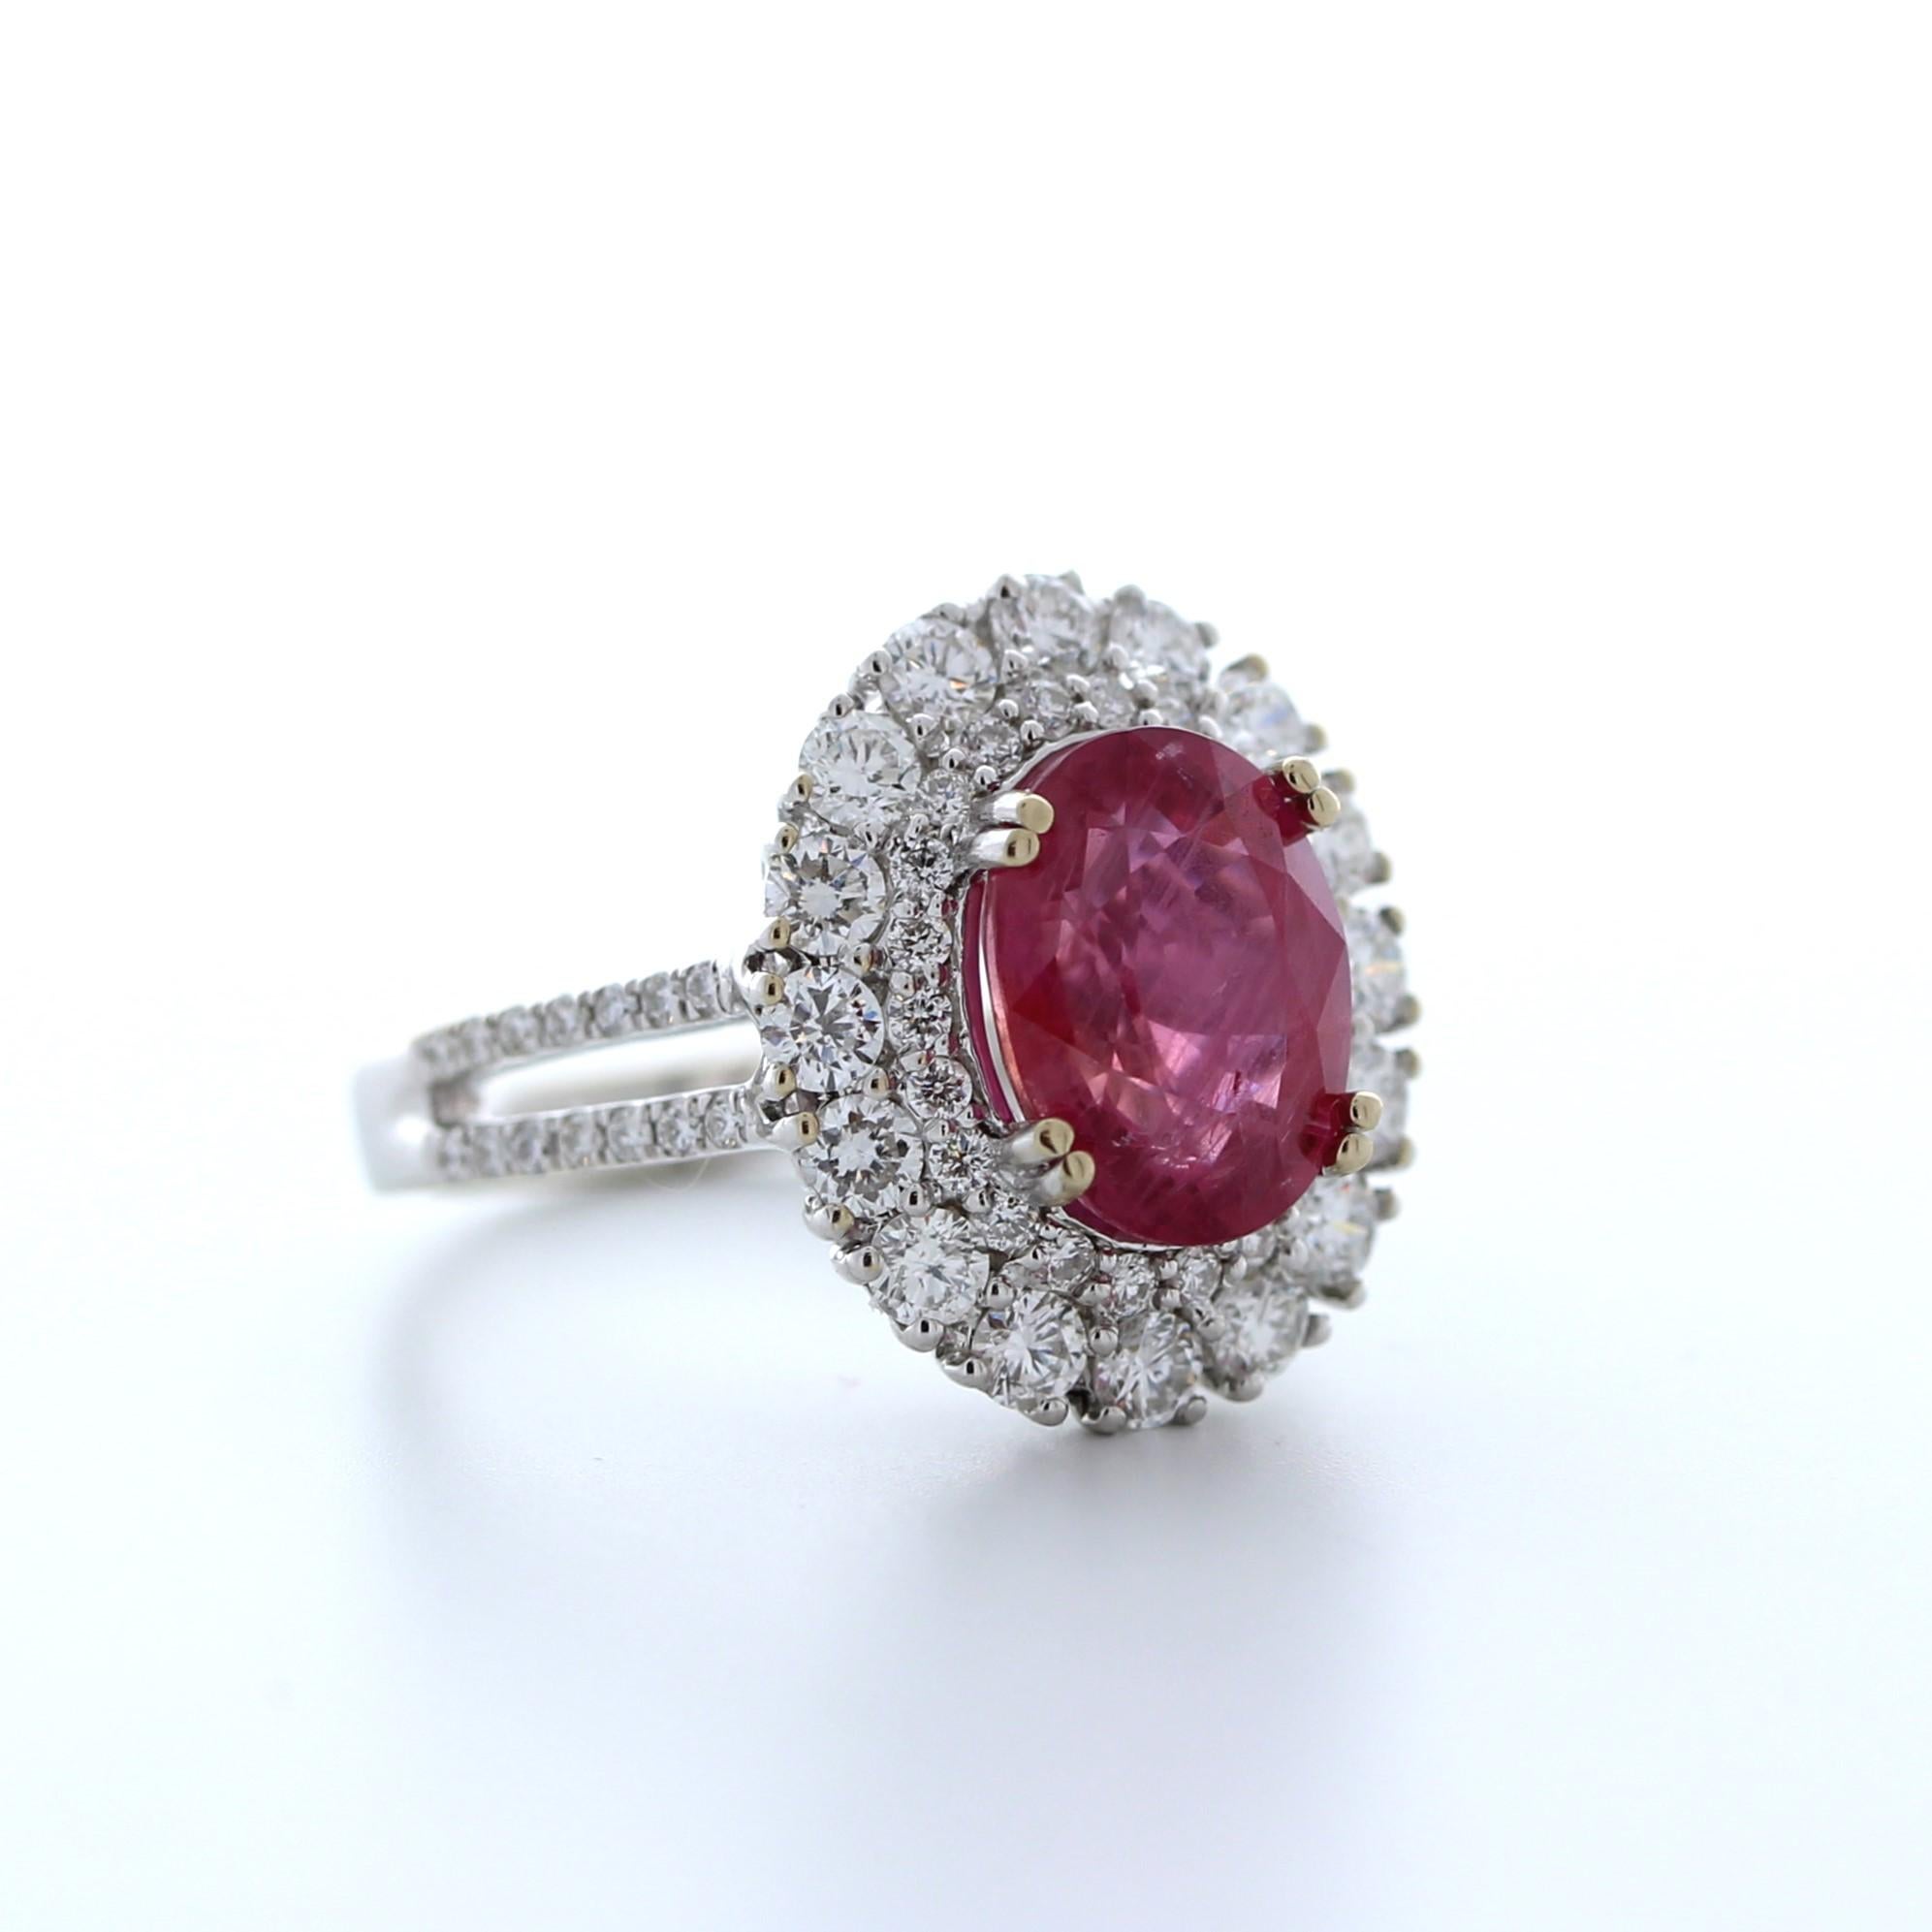 This magnificent 4.39 carat weight oval shape ruby fashion ring is a true showstopper. The vibrant red hue of the ruby is rich and intense, and the oval cut allows it to reflect light beautifully. Set in luxurious 18K white gold, the ruby is